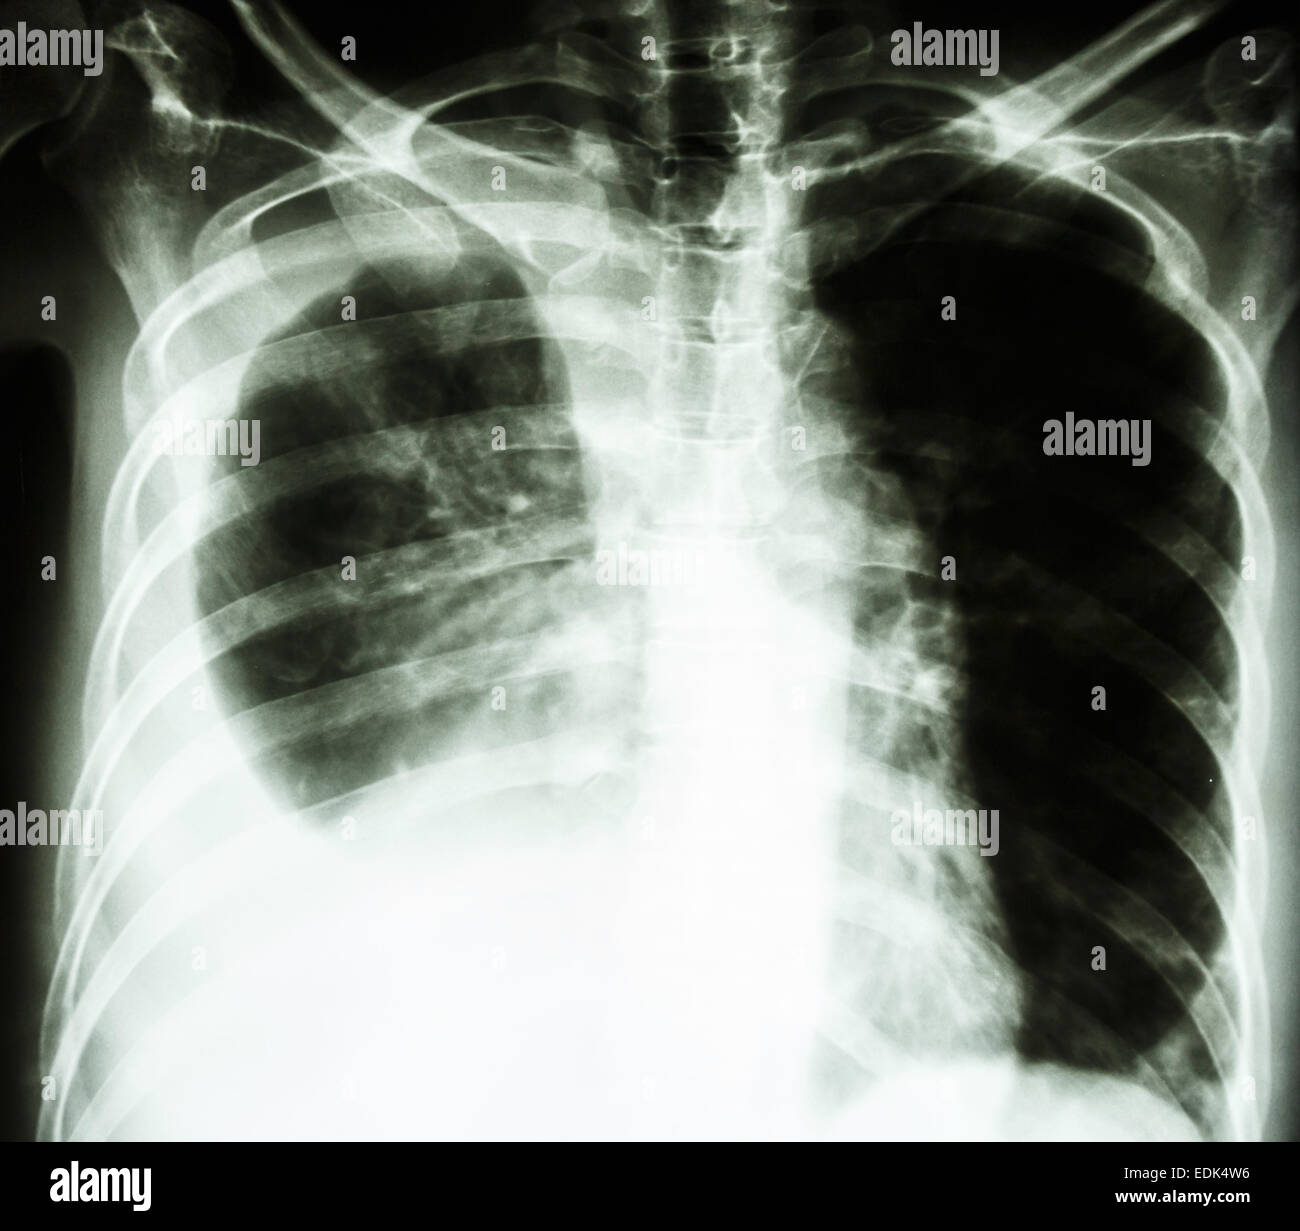 film chest X-ray PA upright : show pleural effusion at right lung due to lung cancer Stock Photo